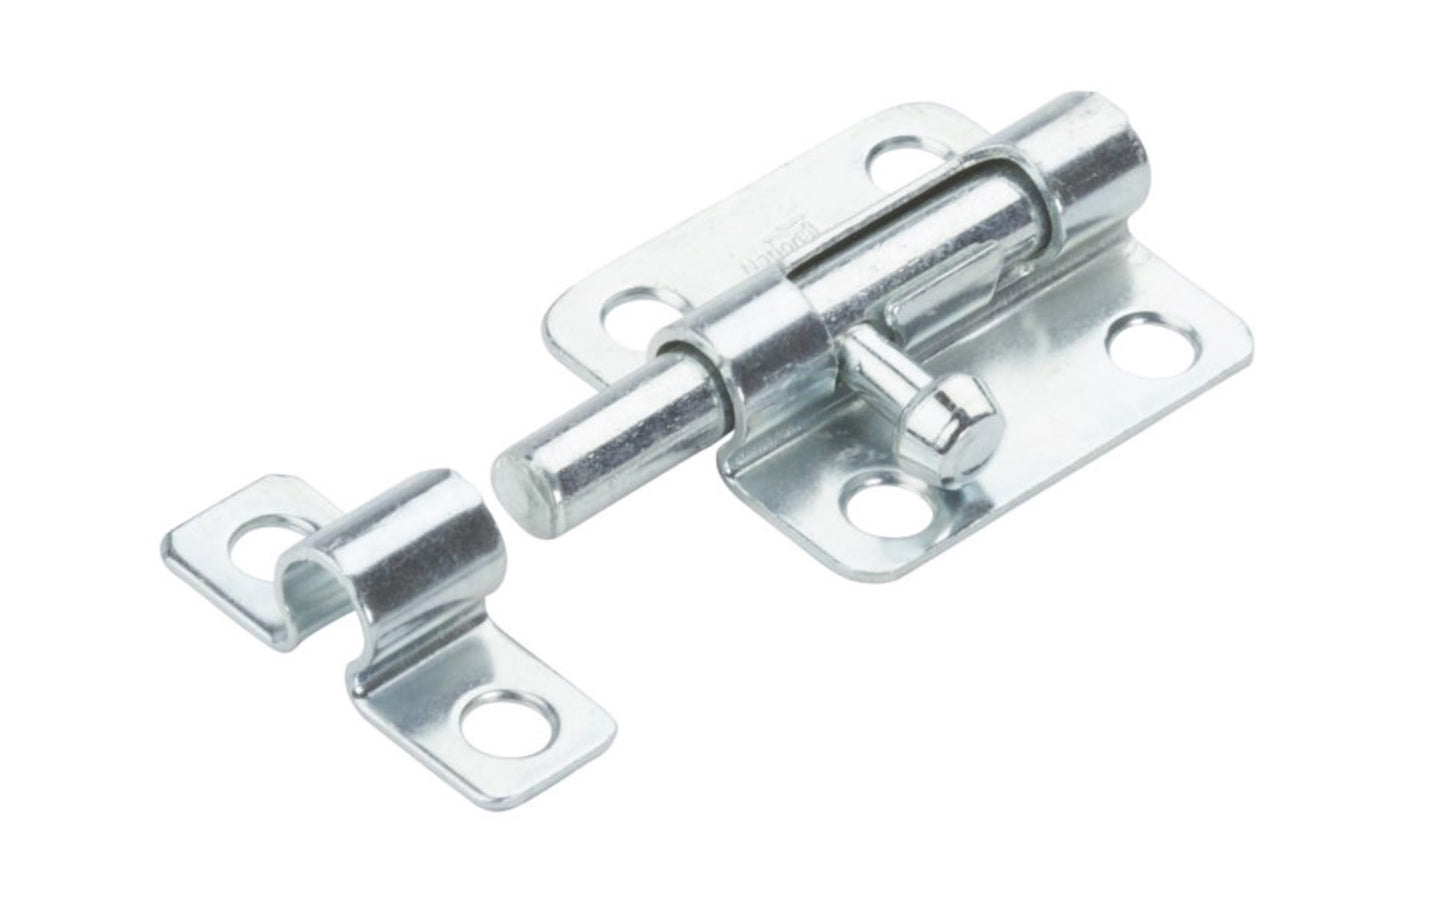 This 2-1/2" Zinc-Plated Finish Barrel Bolt is designed for security applications on lightweight doors, chests, & cabinets. Use on vertical, horizontal, left or right hand applications. Includes six zinc-plated steel phillips screws. 2-1/2" width x 1-1/2" height. National Hardware Model No. N151-449. 038613151444